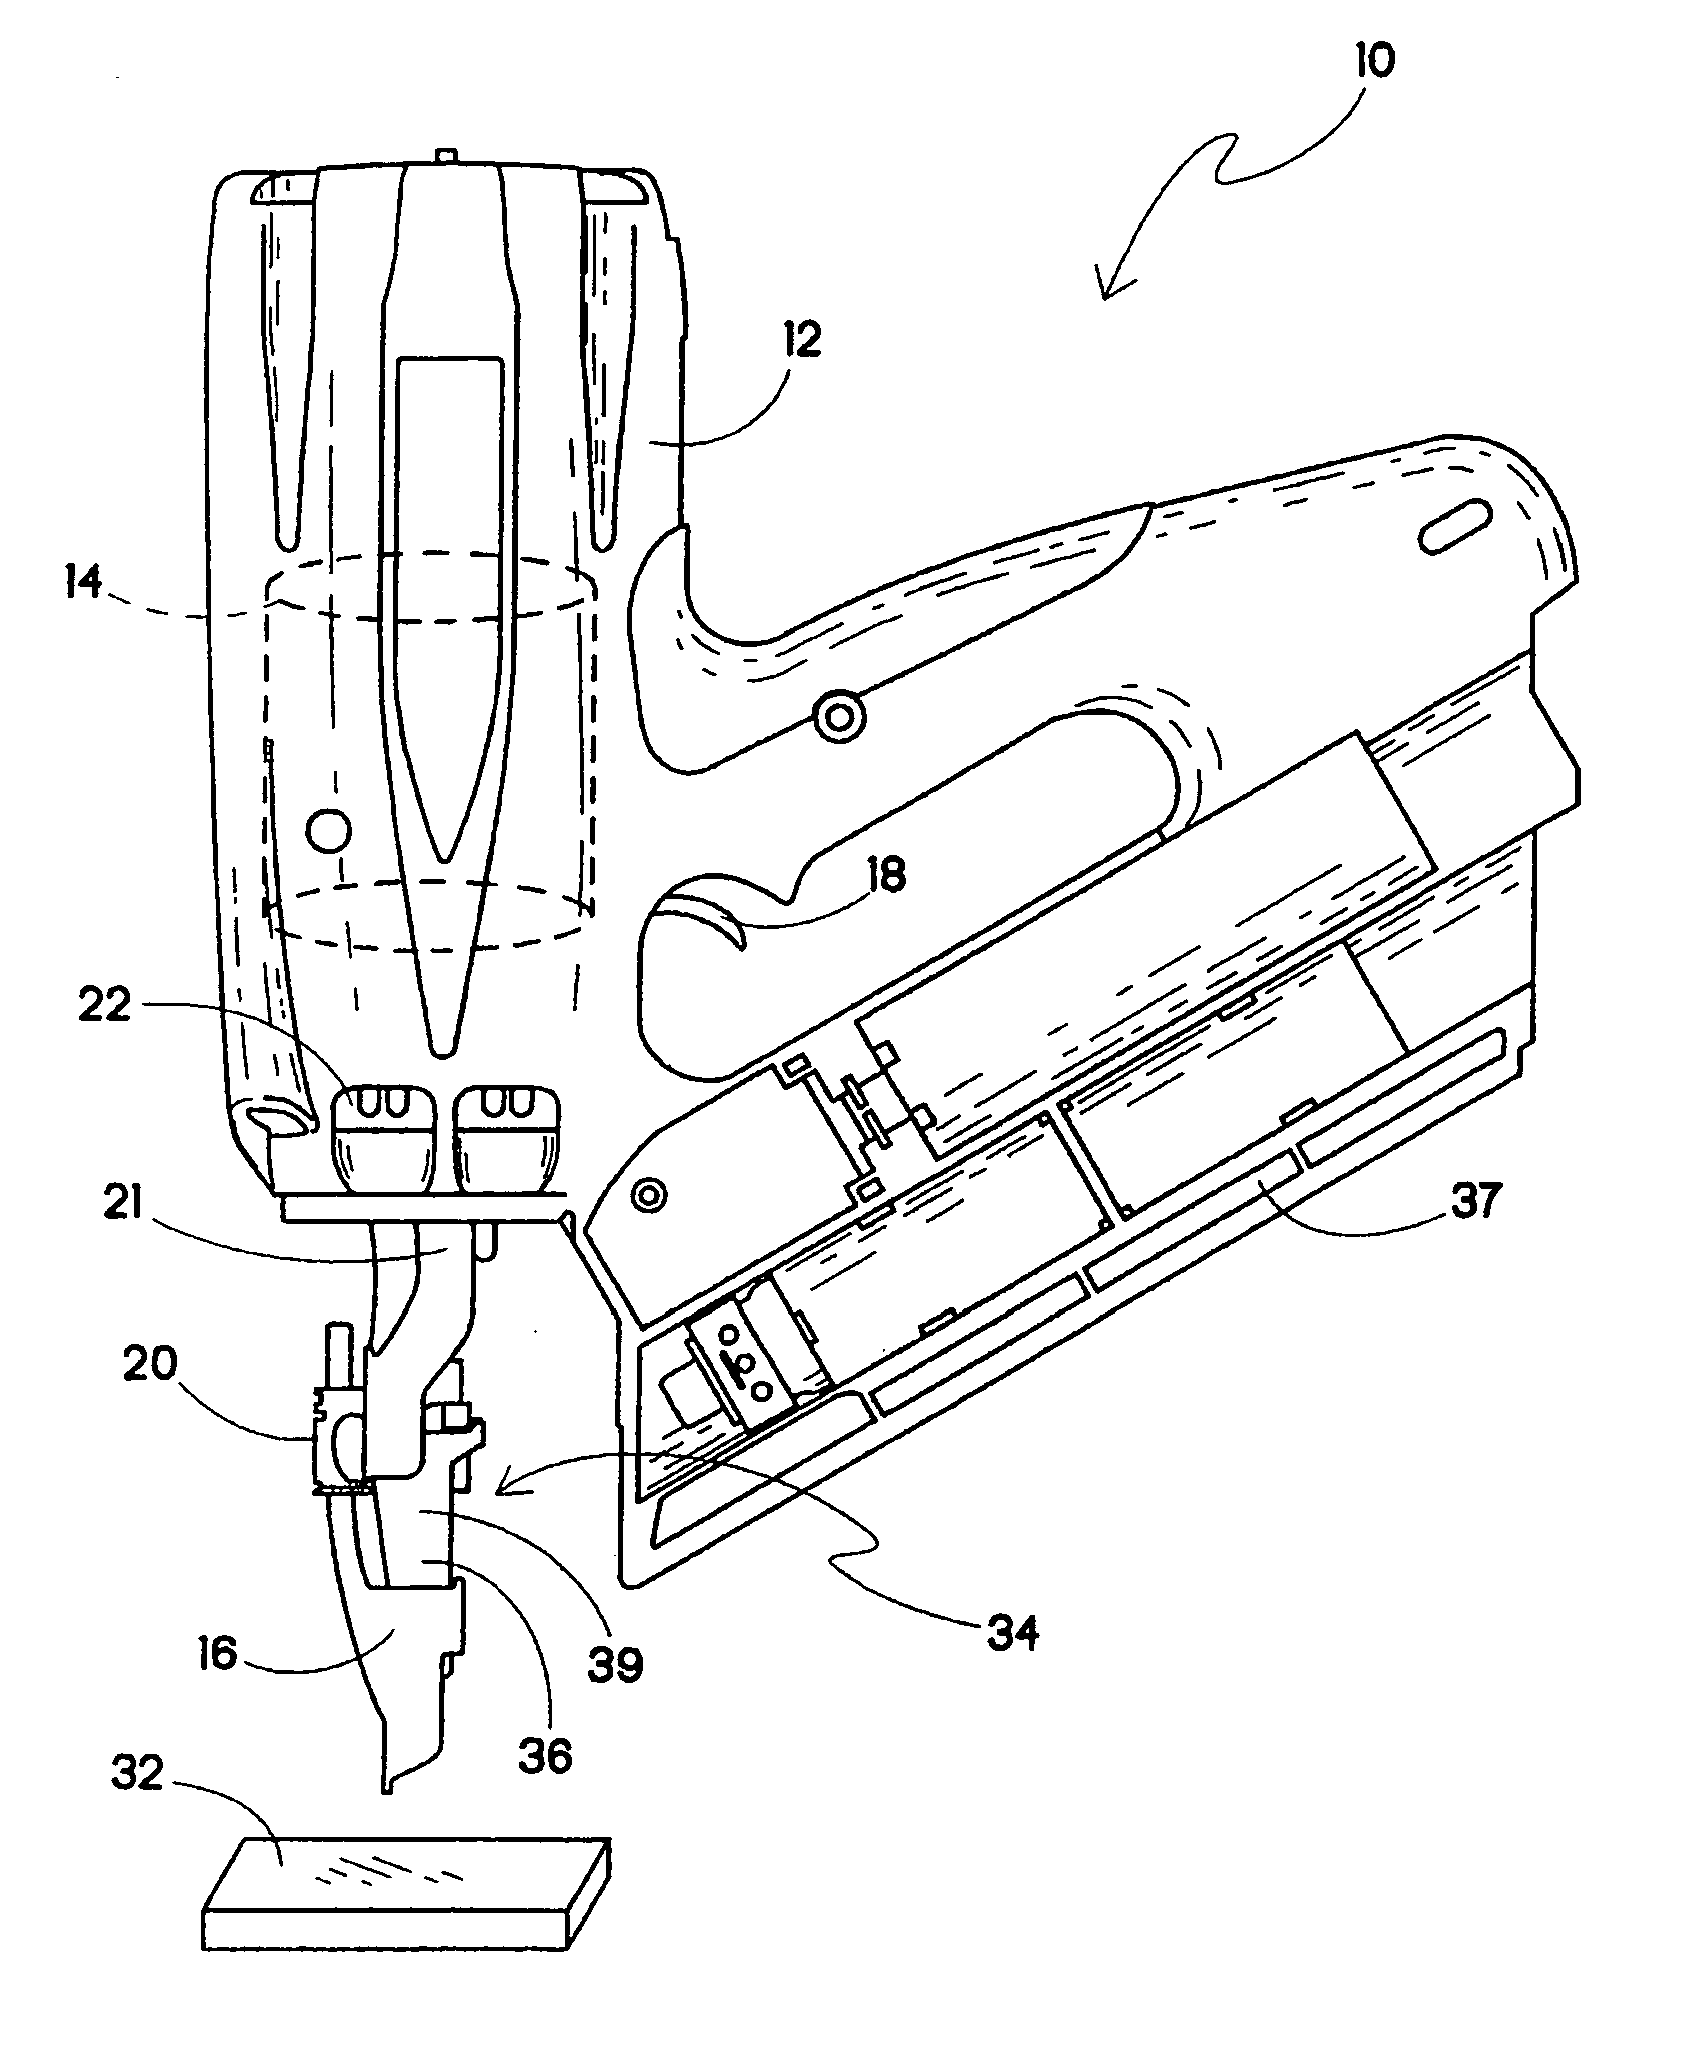 Nose assembly for a fastener driving tool